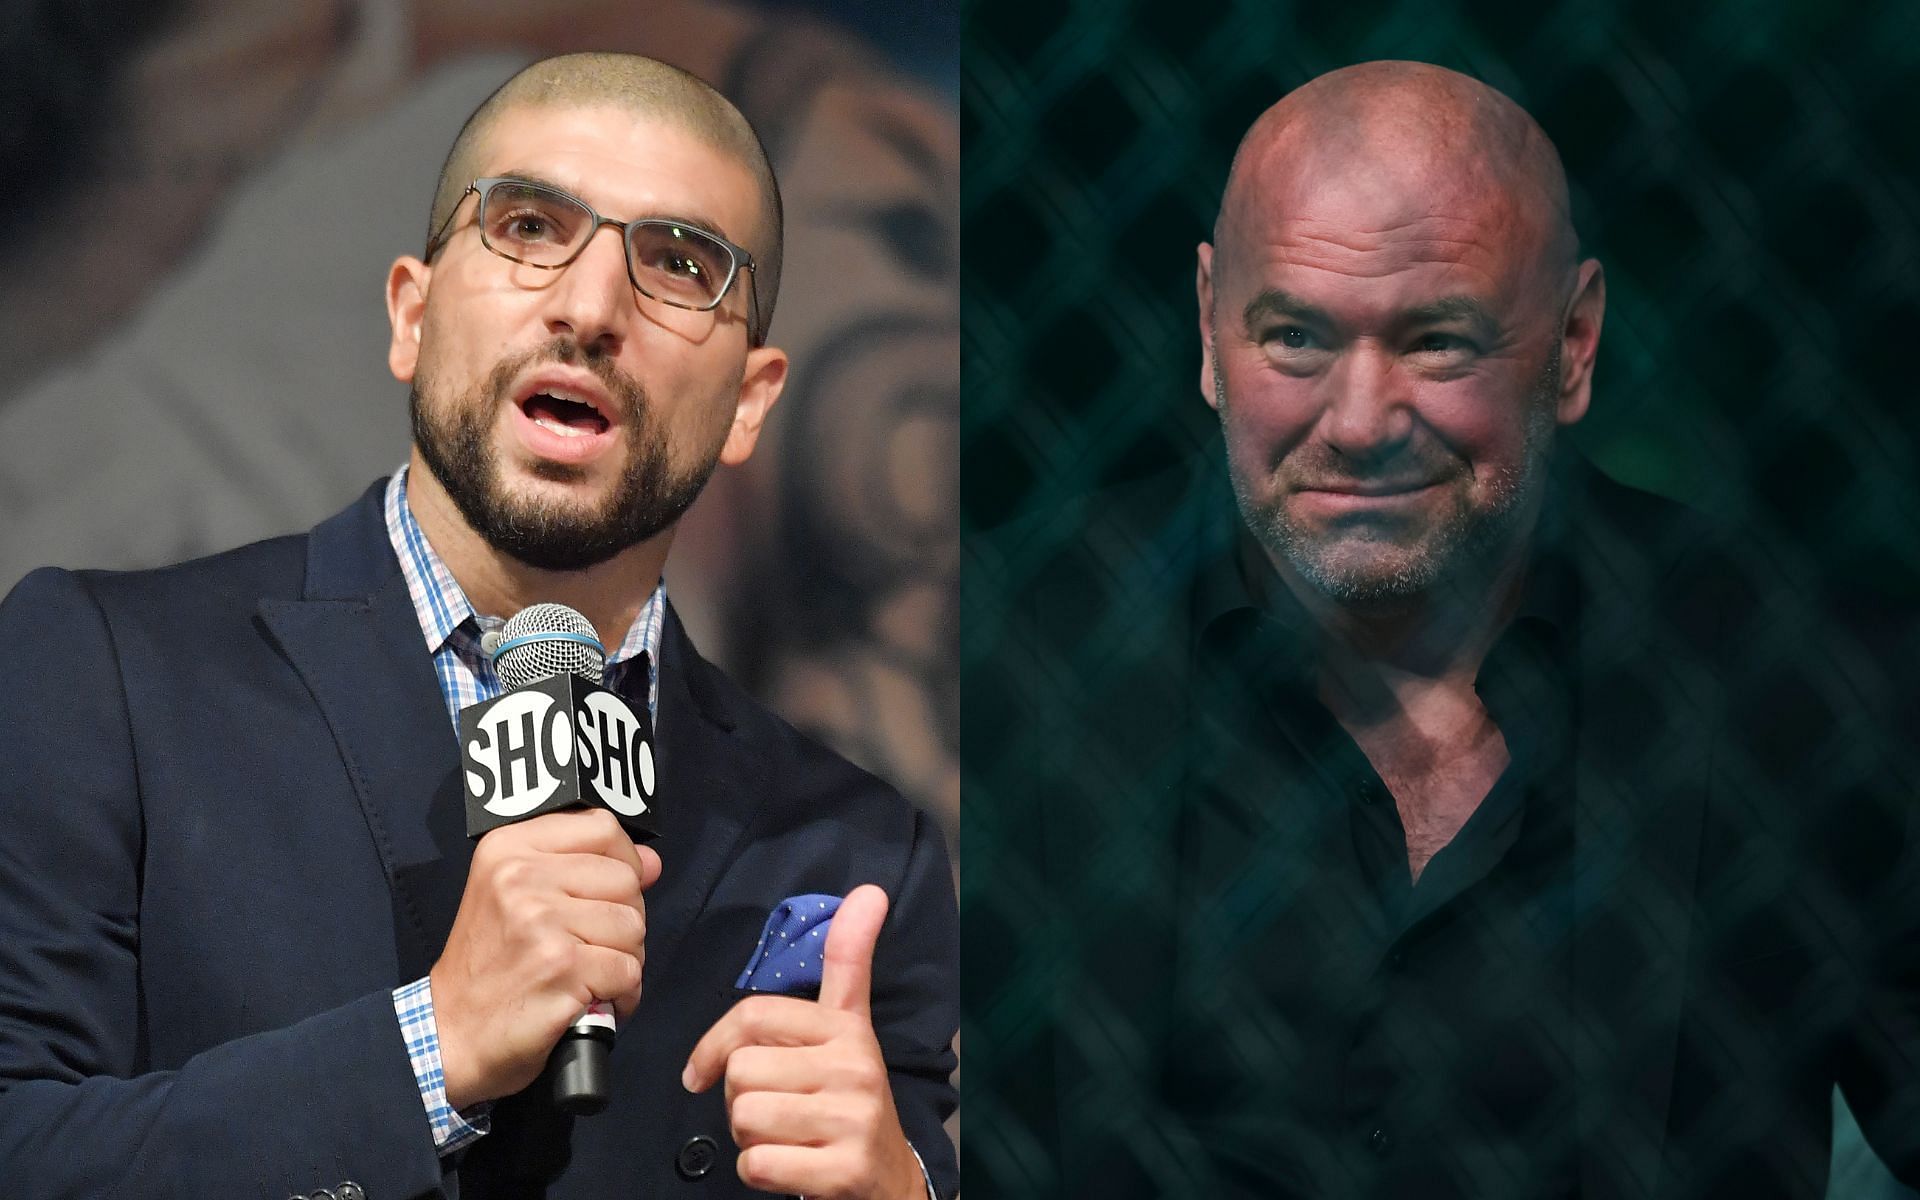 Ariel Helwani (left) has a long-standing feud with UFC and Dana White (right). [via Getty Images]